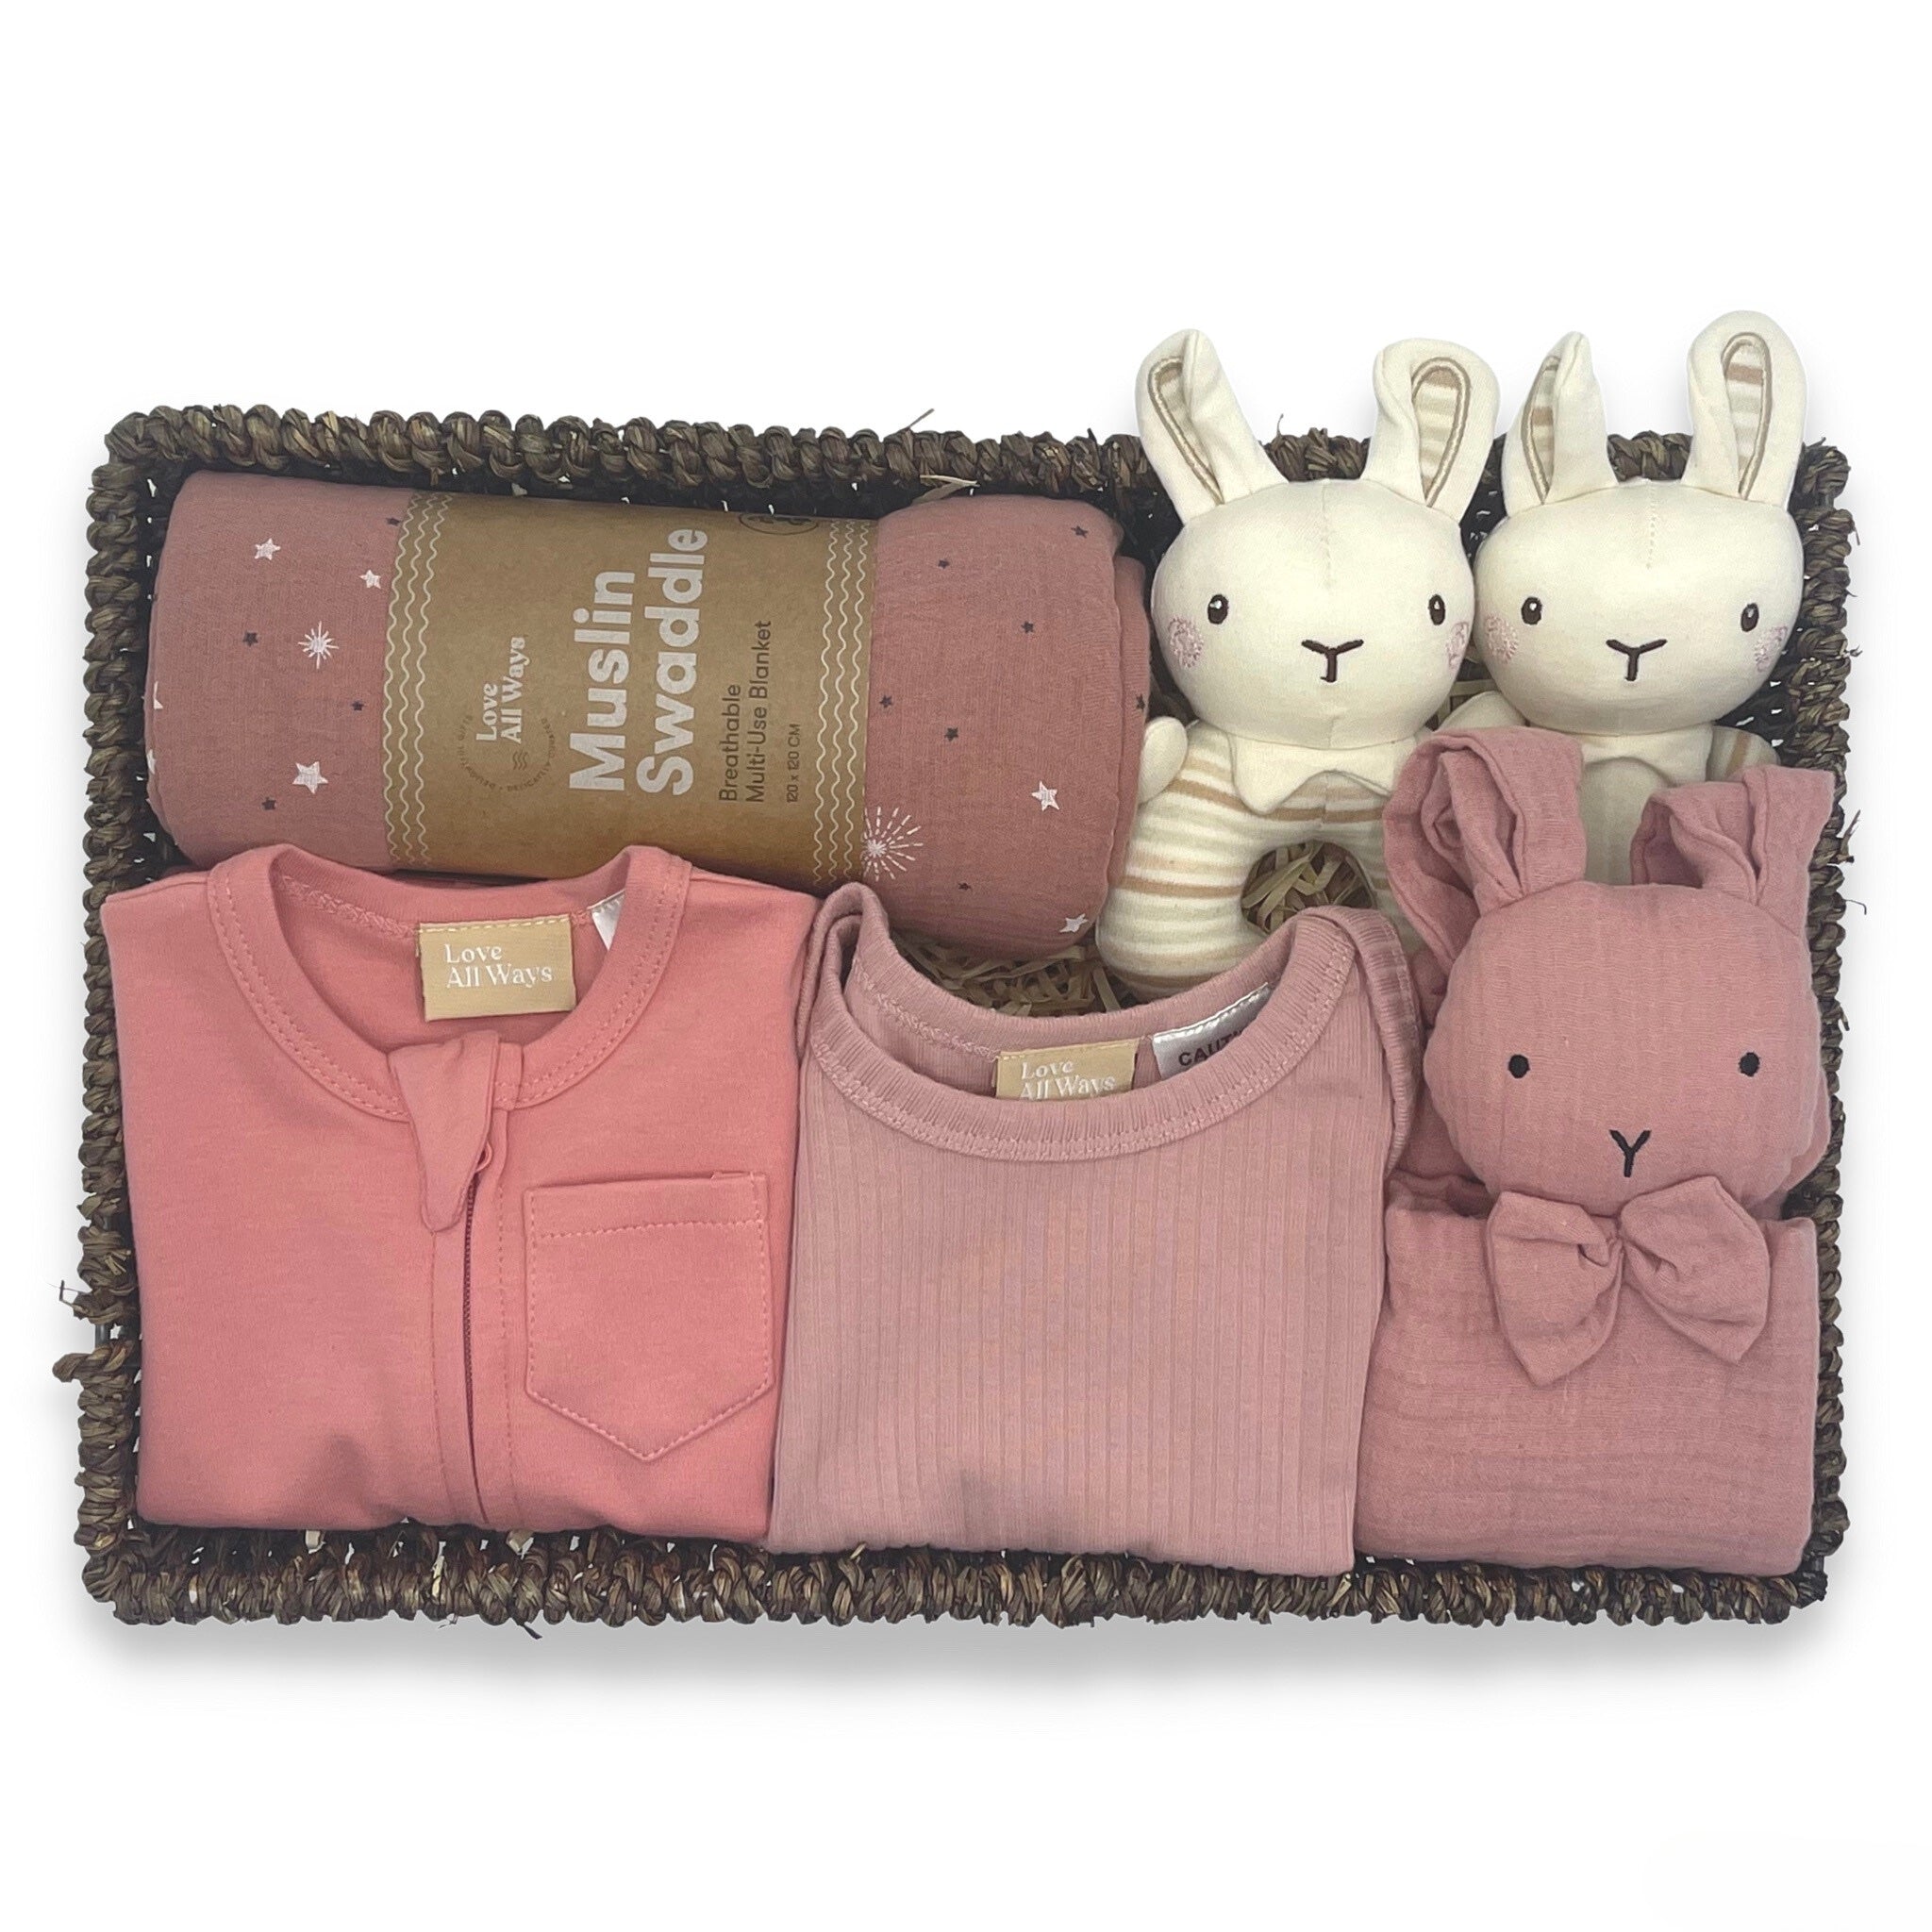 Discover our Signature Organic Baby Boy Gift Basket – the epitome of Love All Ways' ethical and sustainable values. Meticulously curated with core essentials for your little one, elevating your gifting experience. Packaged in a reusable seagrass display. 